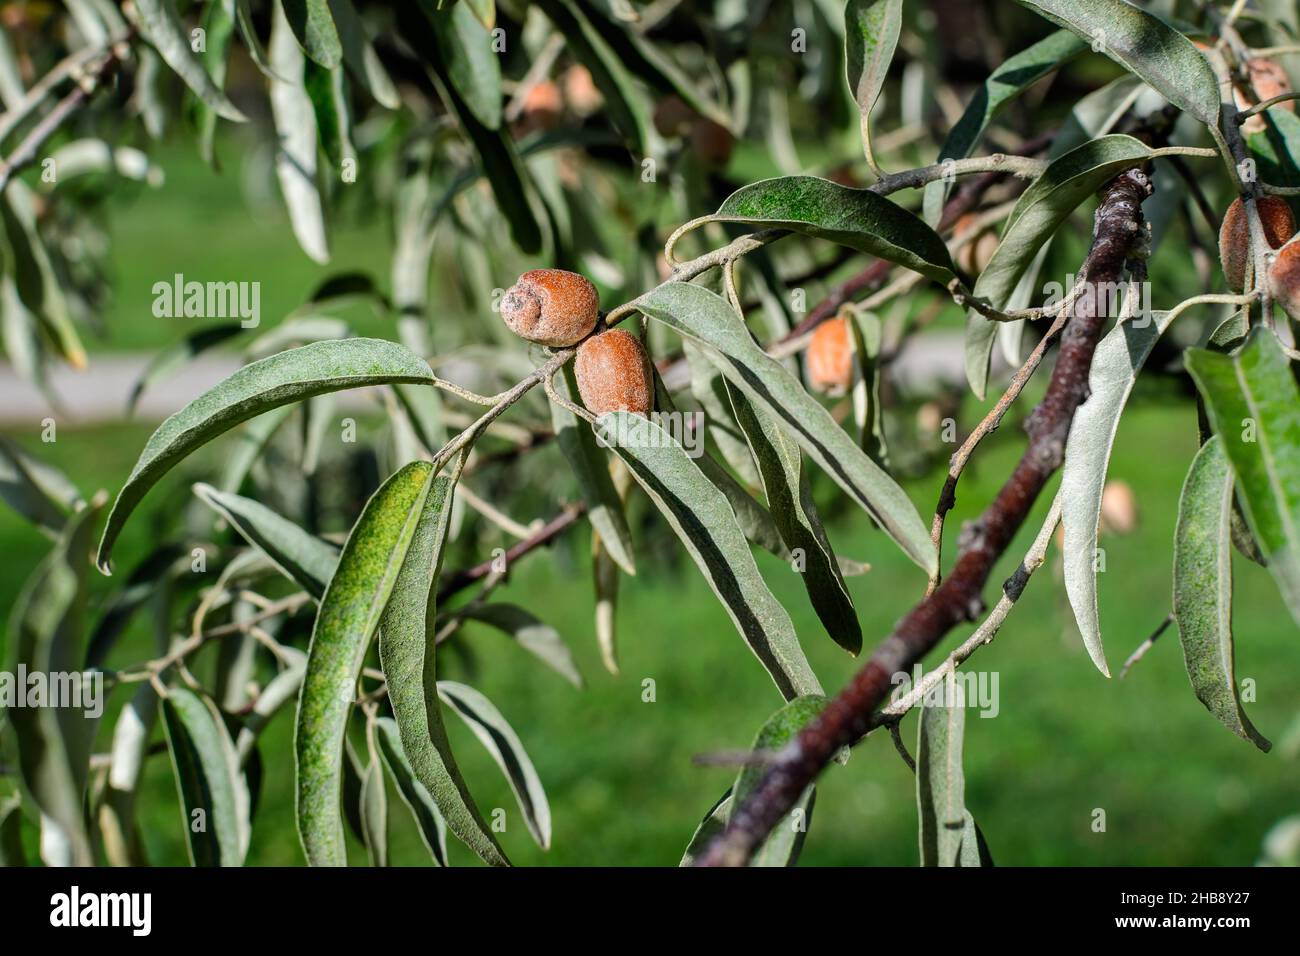 Silver leaves and small ripe fruits or berries of Elaeagnus angustifolia plant, commonly called wild Russian or Persian olive, silver berry, oleaster, Stock Photo